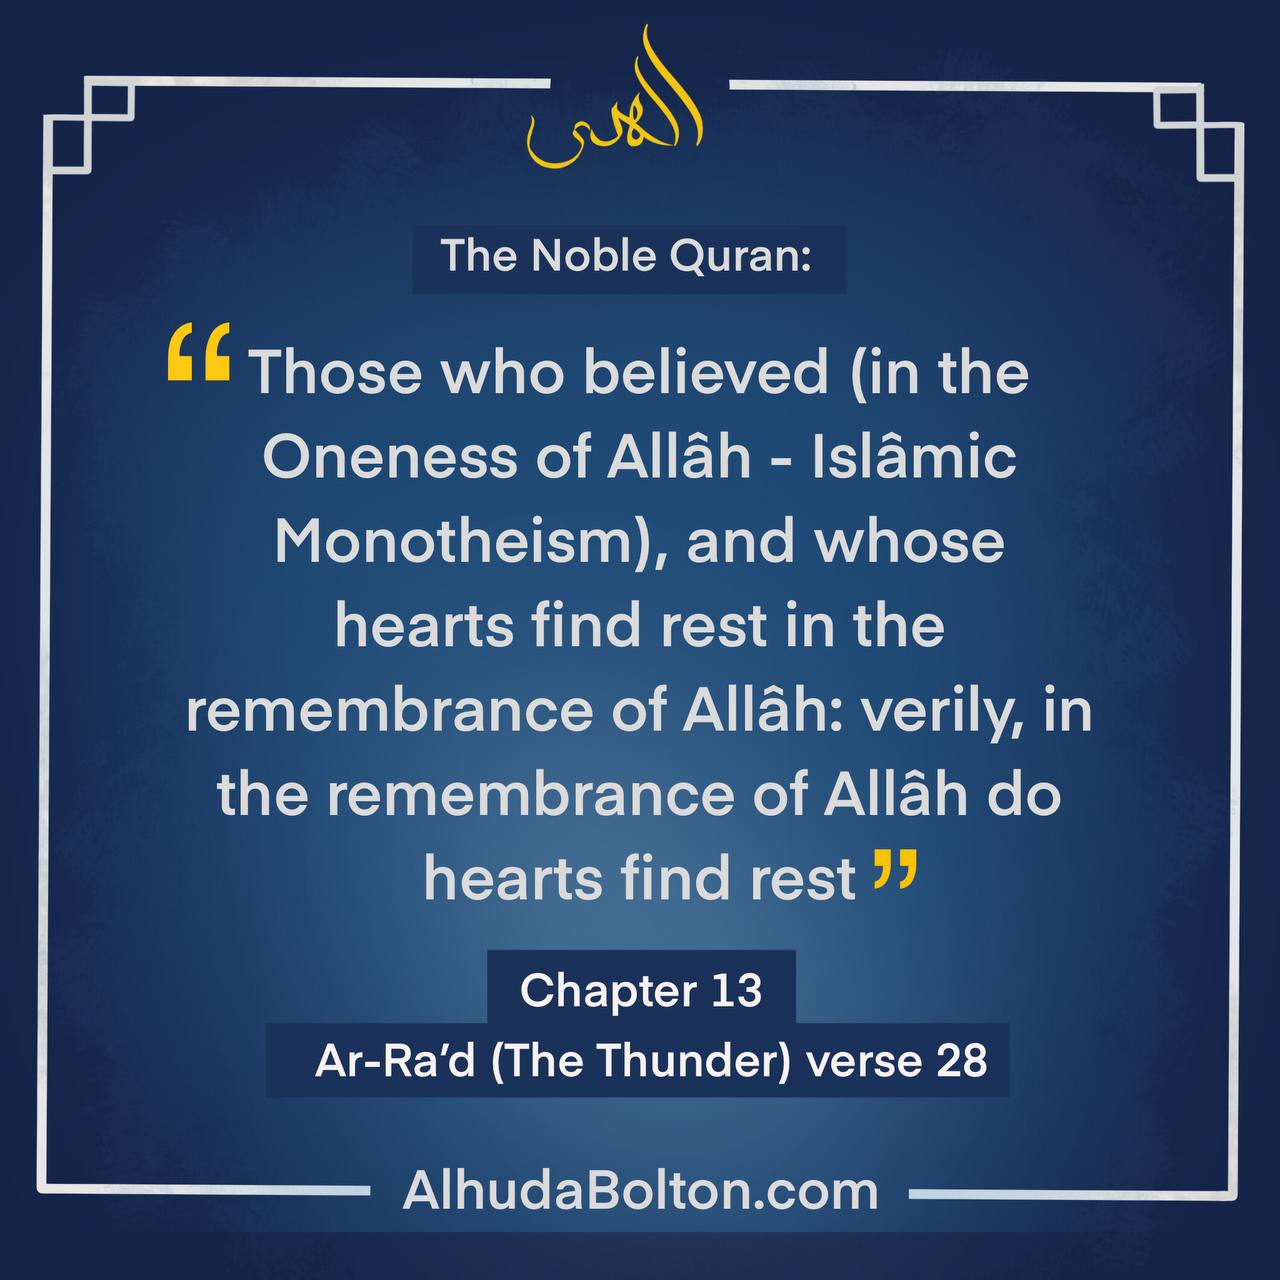 Weekly Quran: “…verily, in the remembrance of Allah do hearts find rest”